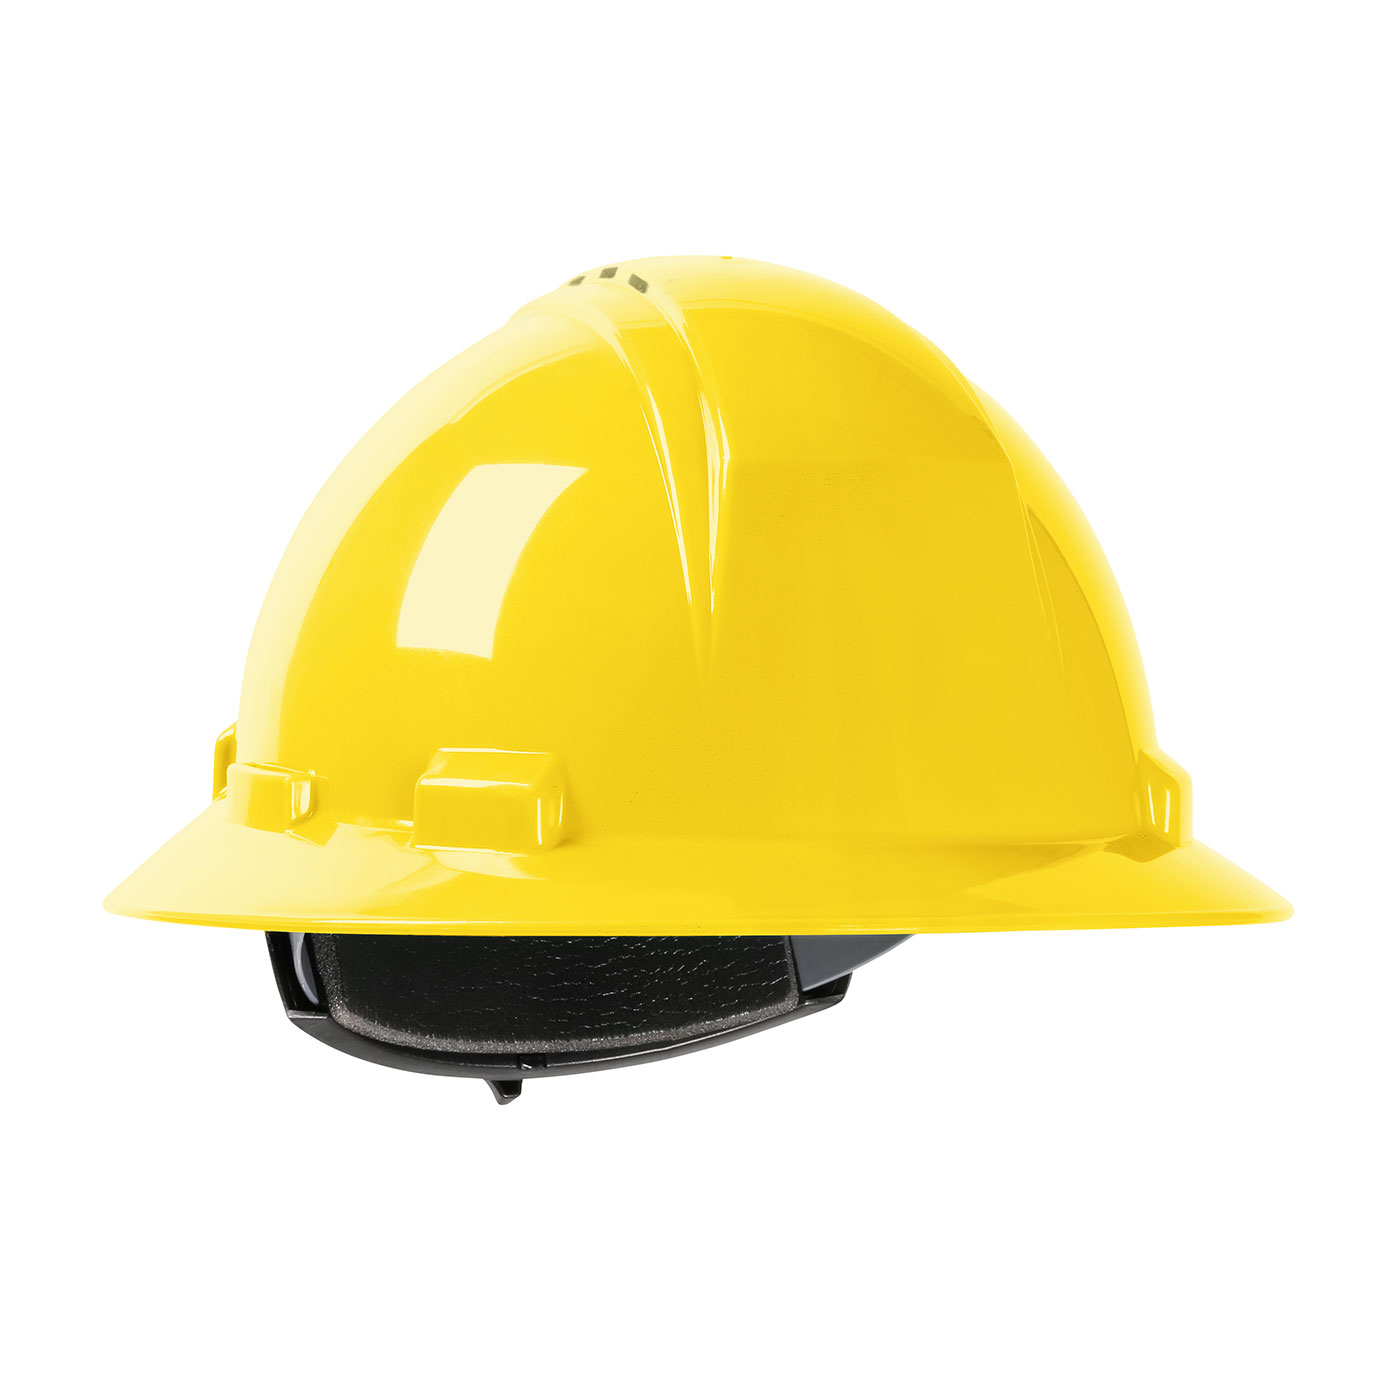 280-HP261RV PIP® Dynamic Kilimanjaro™ Vented Full Brim Hard Hat with HDPE Shell, 4-Point Textile Suspension and Wheel Ratchet Adjustment - Yellow